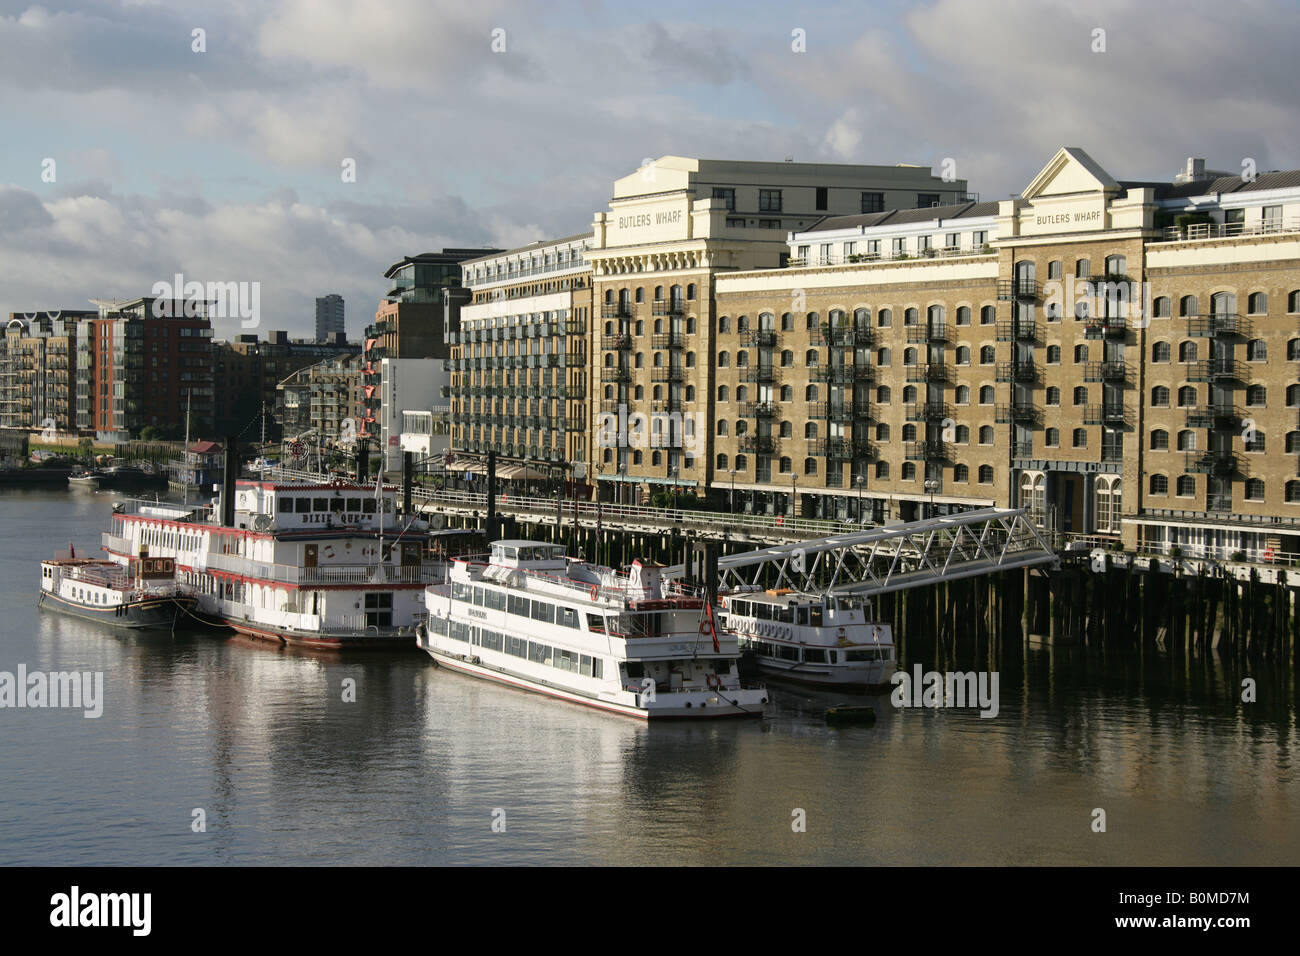 City of London, England. Morning view of Thames river cruise entertainment ships moored at Butlers Wharf on the River Thames. Stock Photo